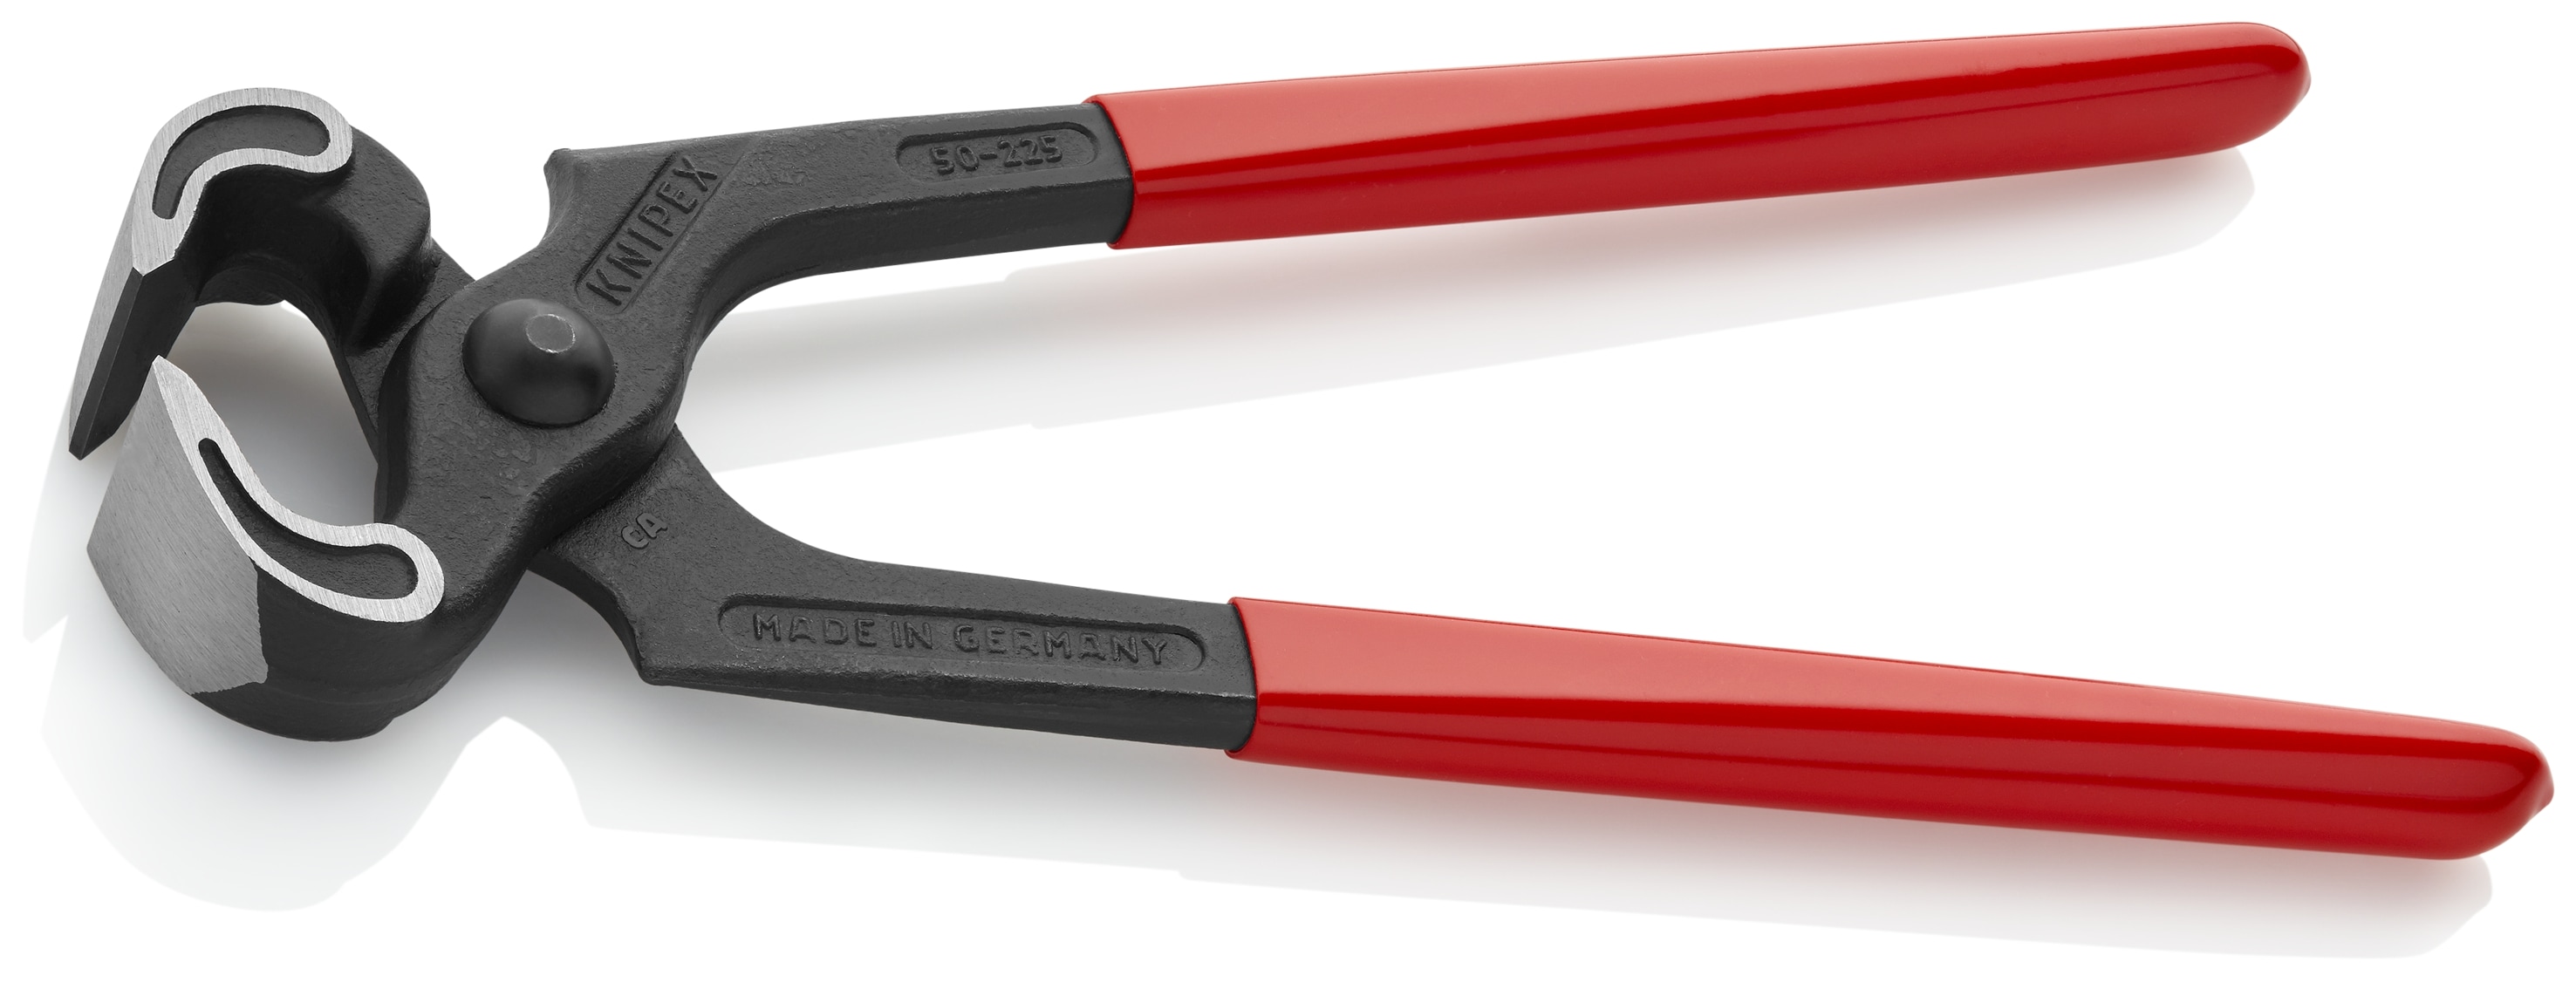 KNIPEX 8.95-in Carpentry End Cutting Pliers at